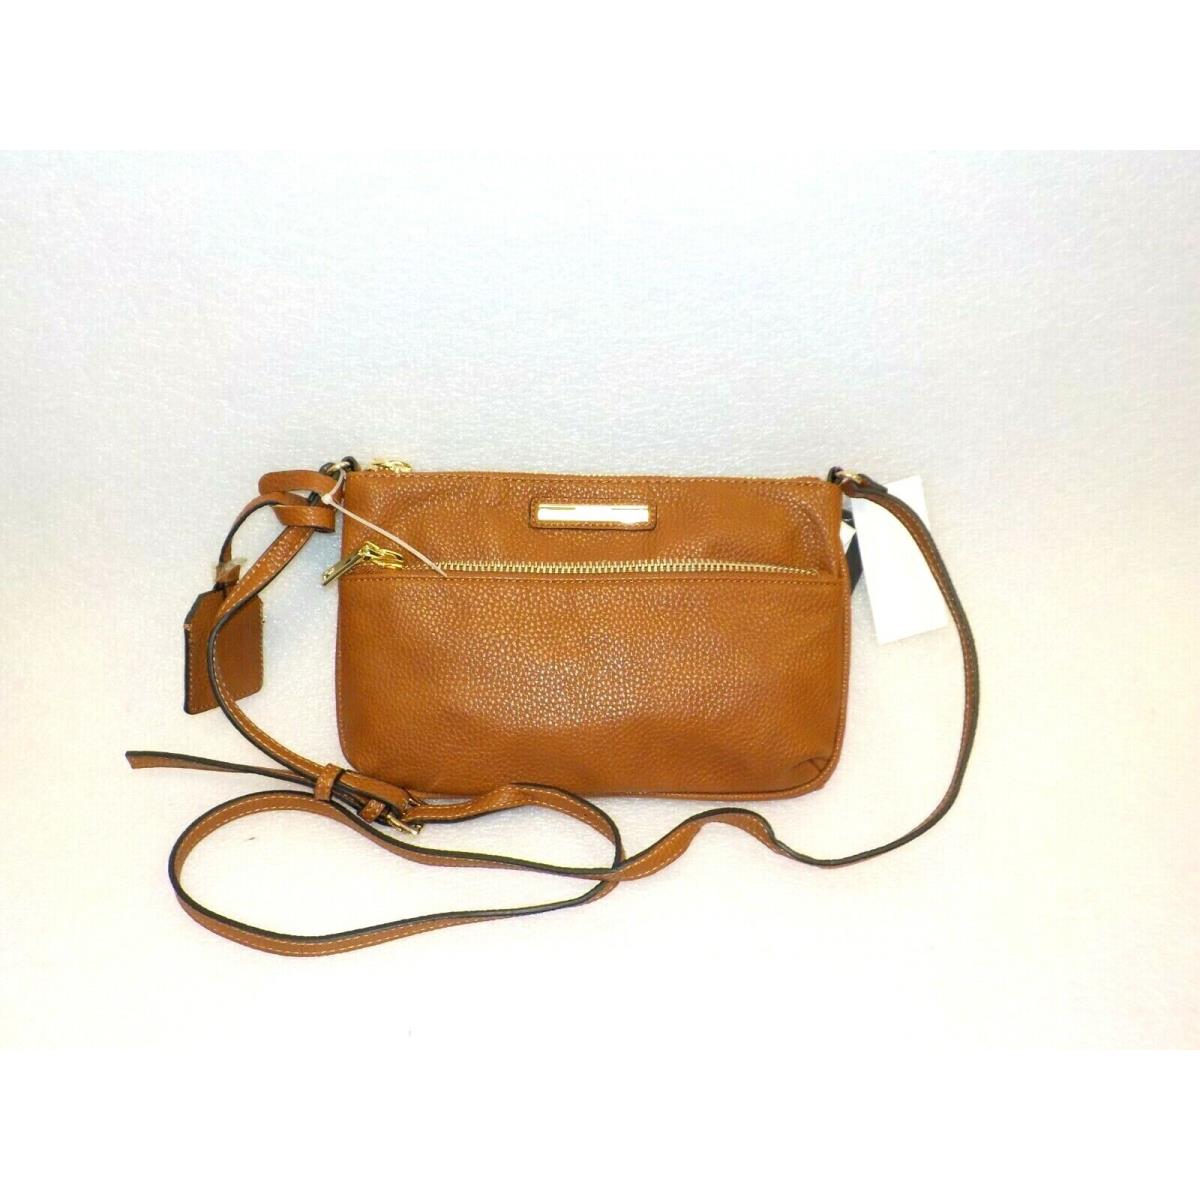 Steve Madden Women`s Purse Brown Leather Young Crossbody Bag